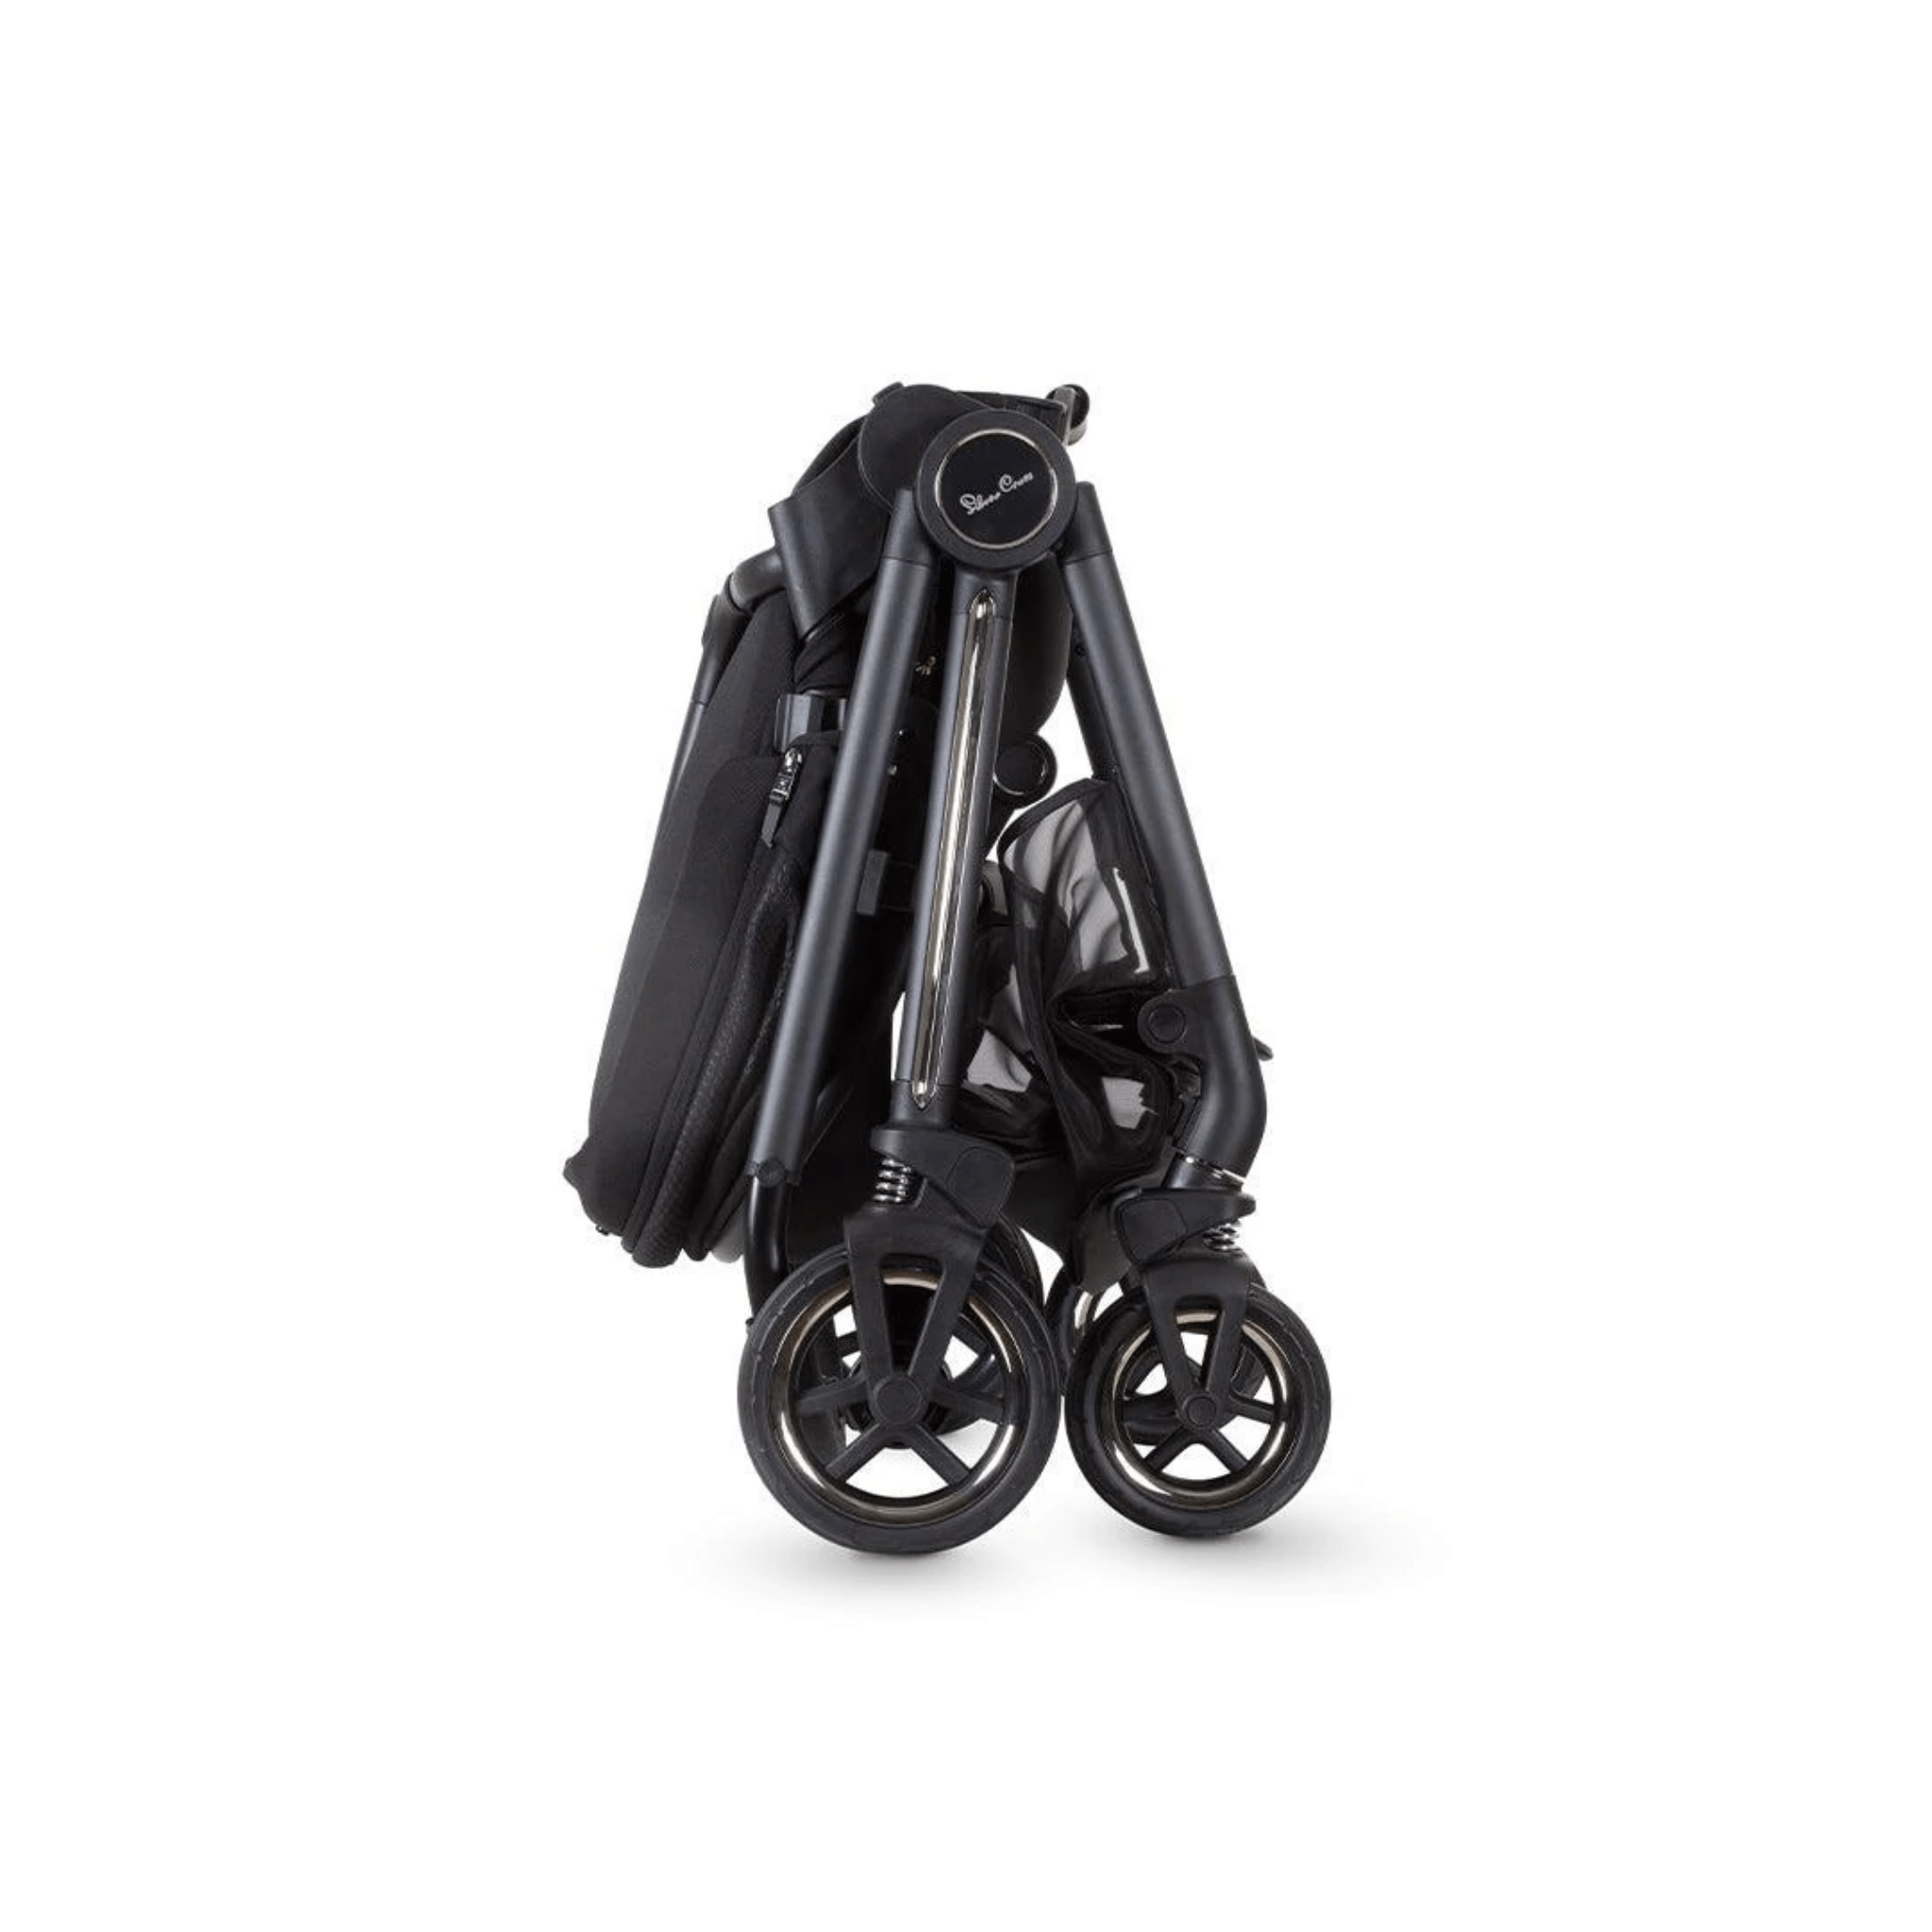 Silver Cross Dune Travel System with Folding Carrycot in Space Travel Systems KTDT.SP3